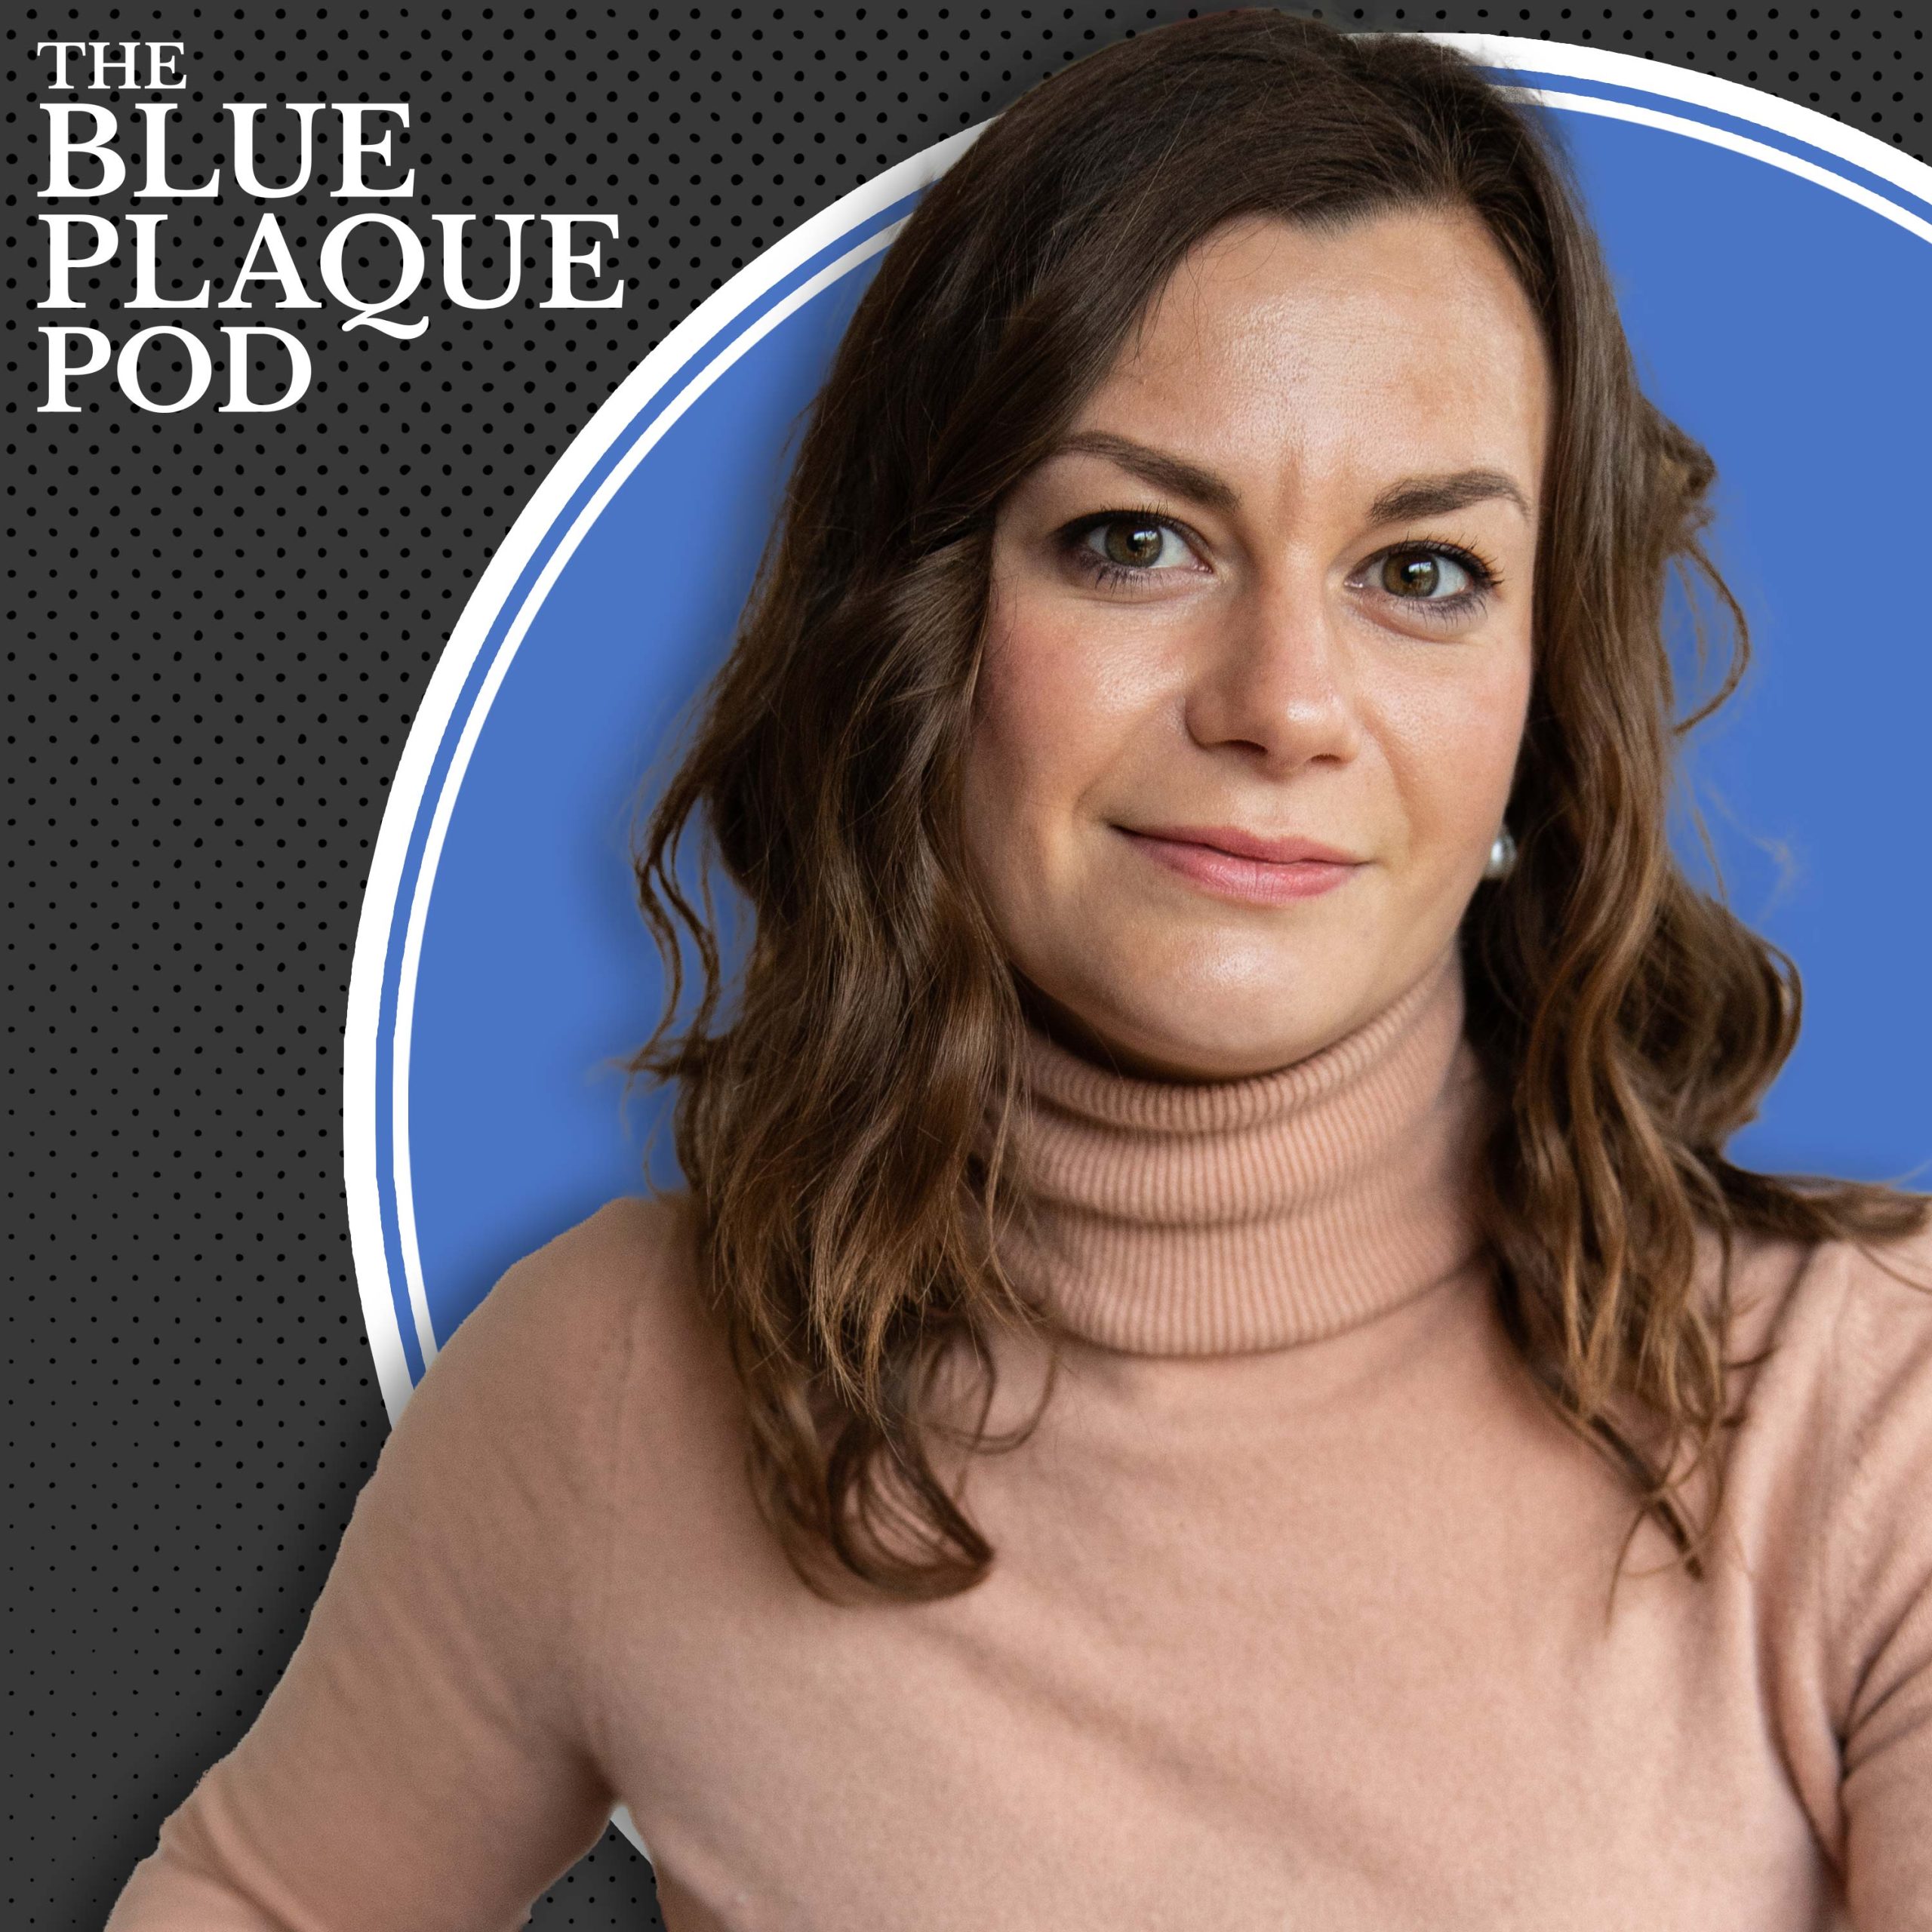 The Blue Plaque Pod series cover featuring host Kassia St Clair